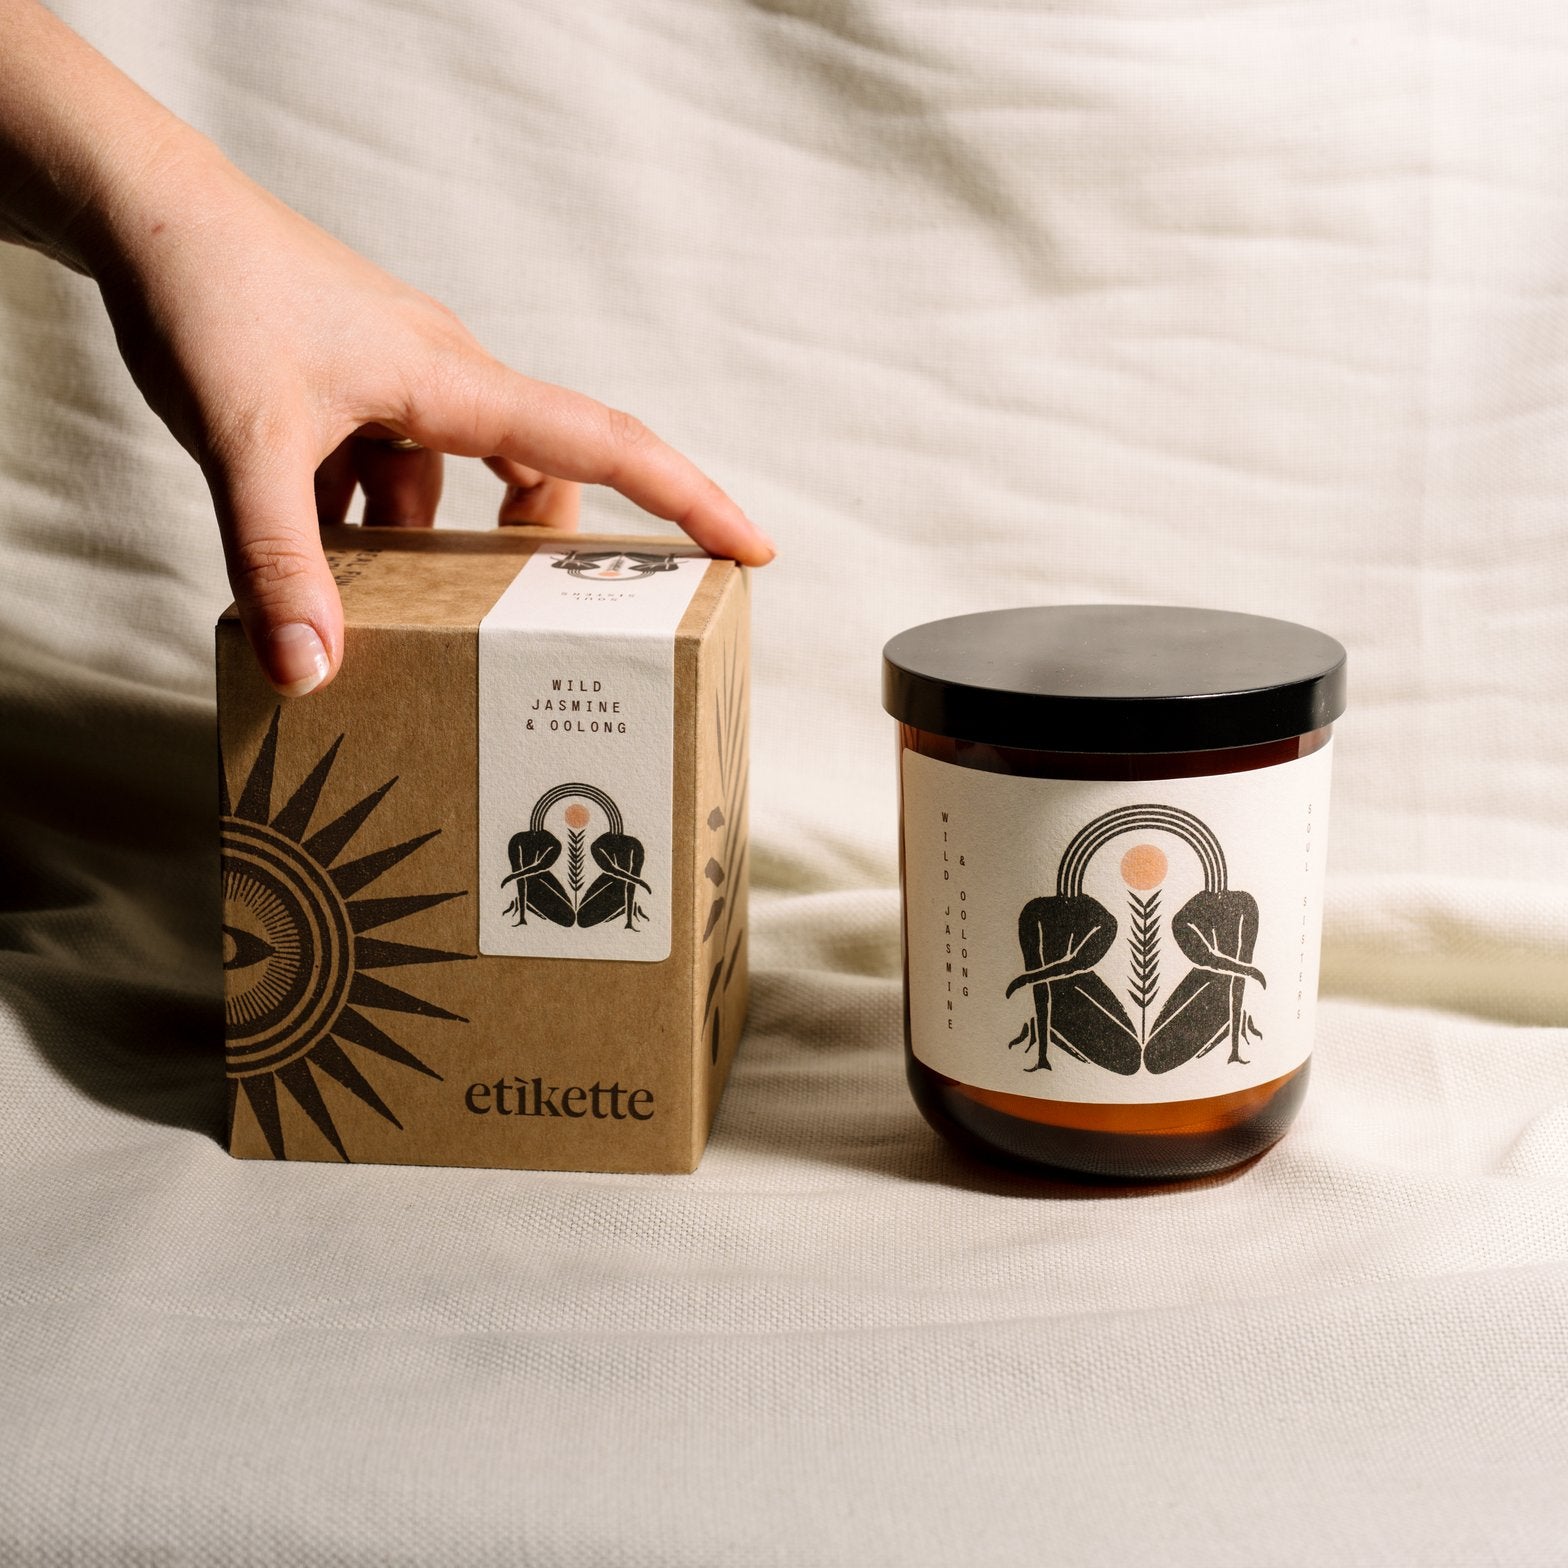 Soul Sisters Soy Candle in Wild Jasmine & Oolong